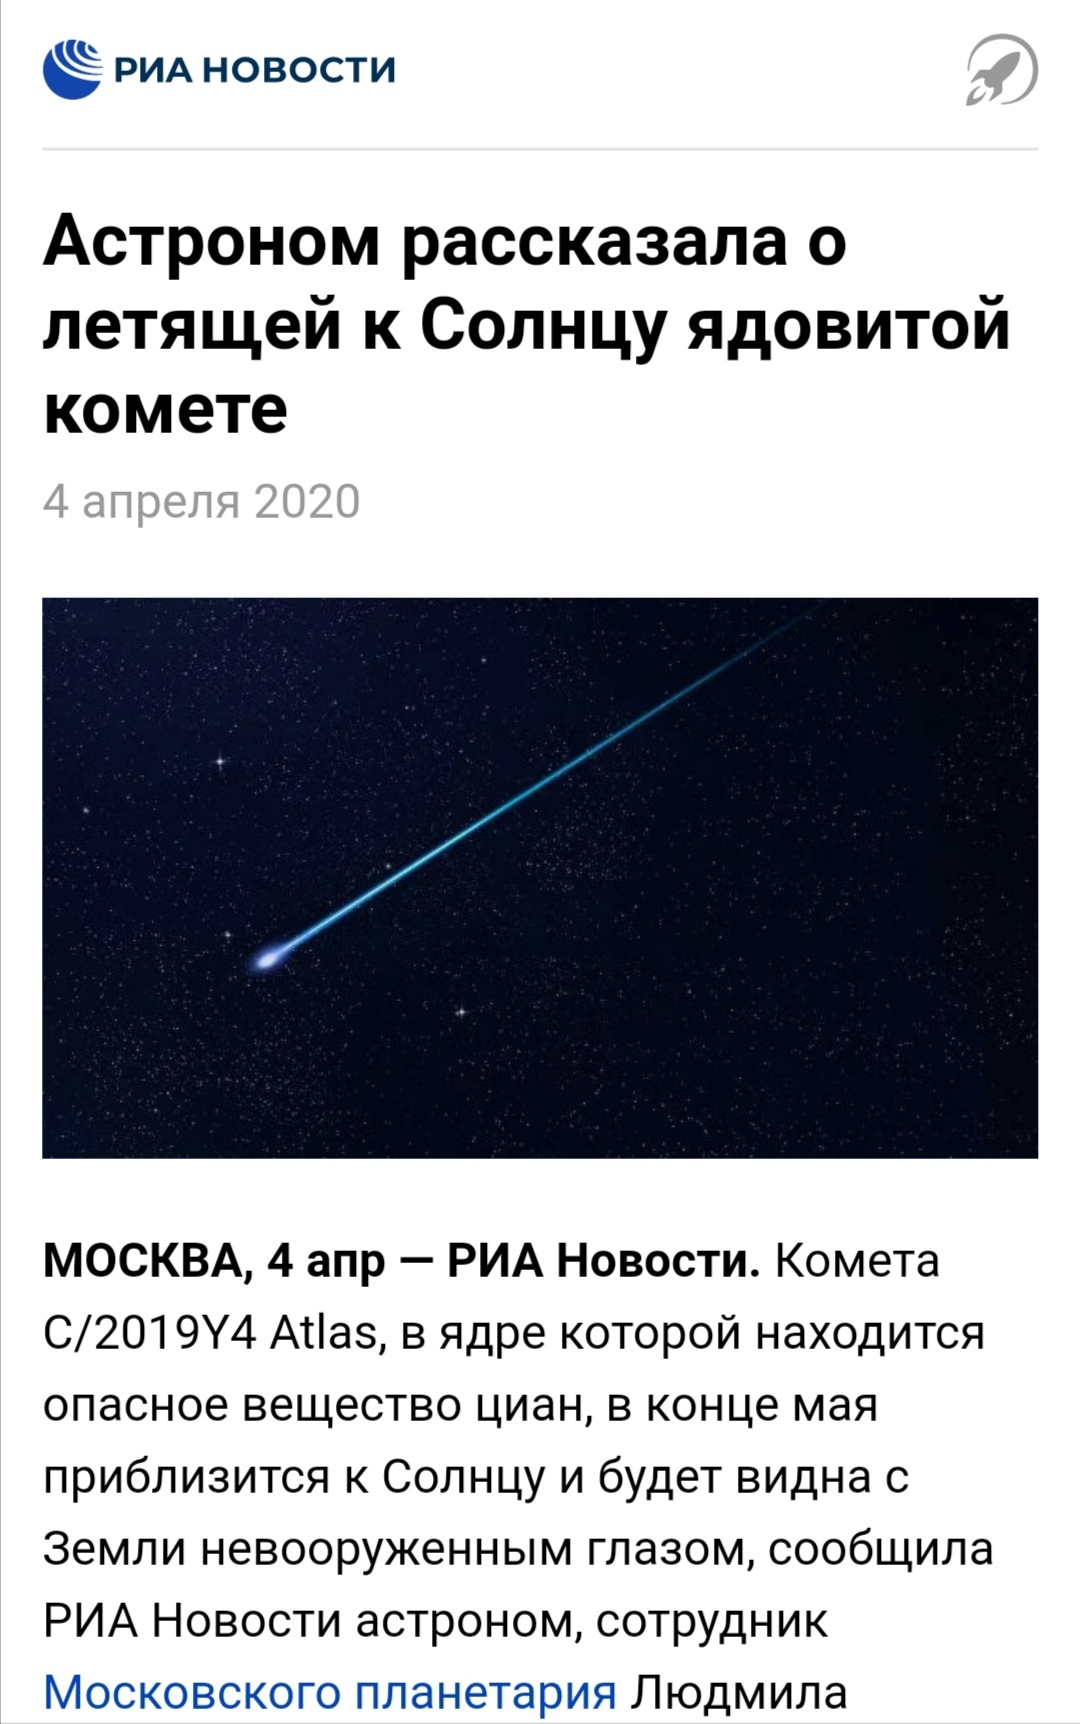 2020 don't stop - 2020, Black hole, It's just getting started, Риа Новости, Longpost